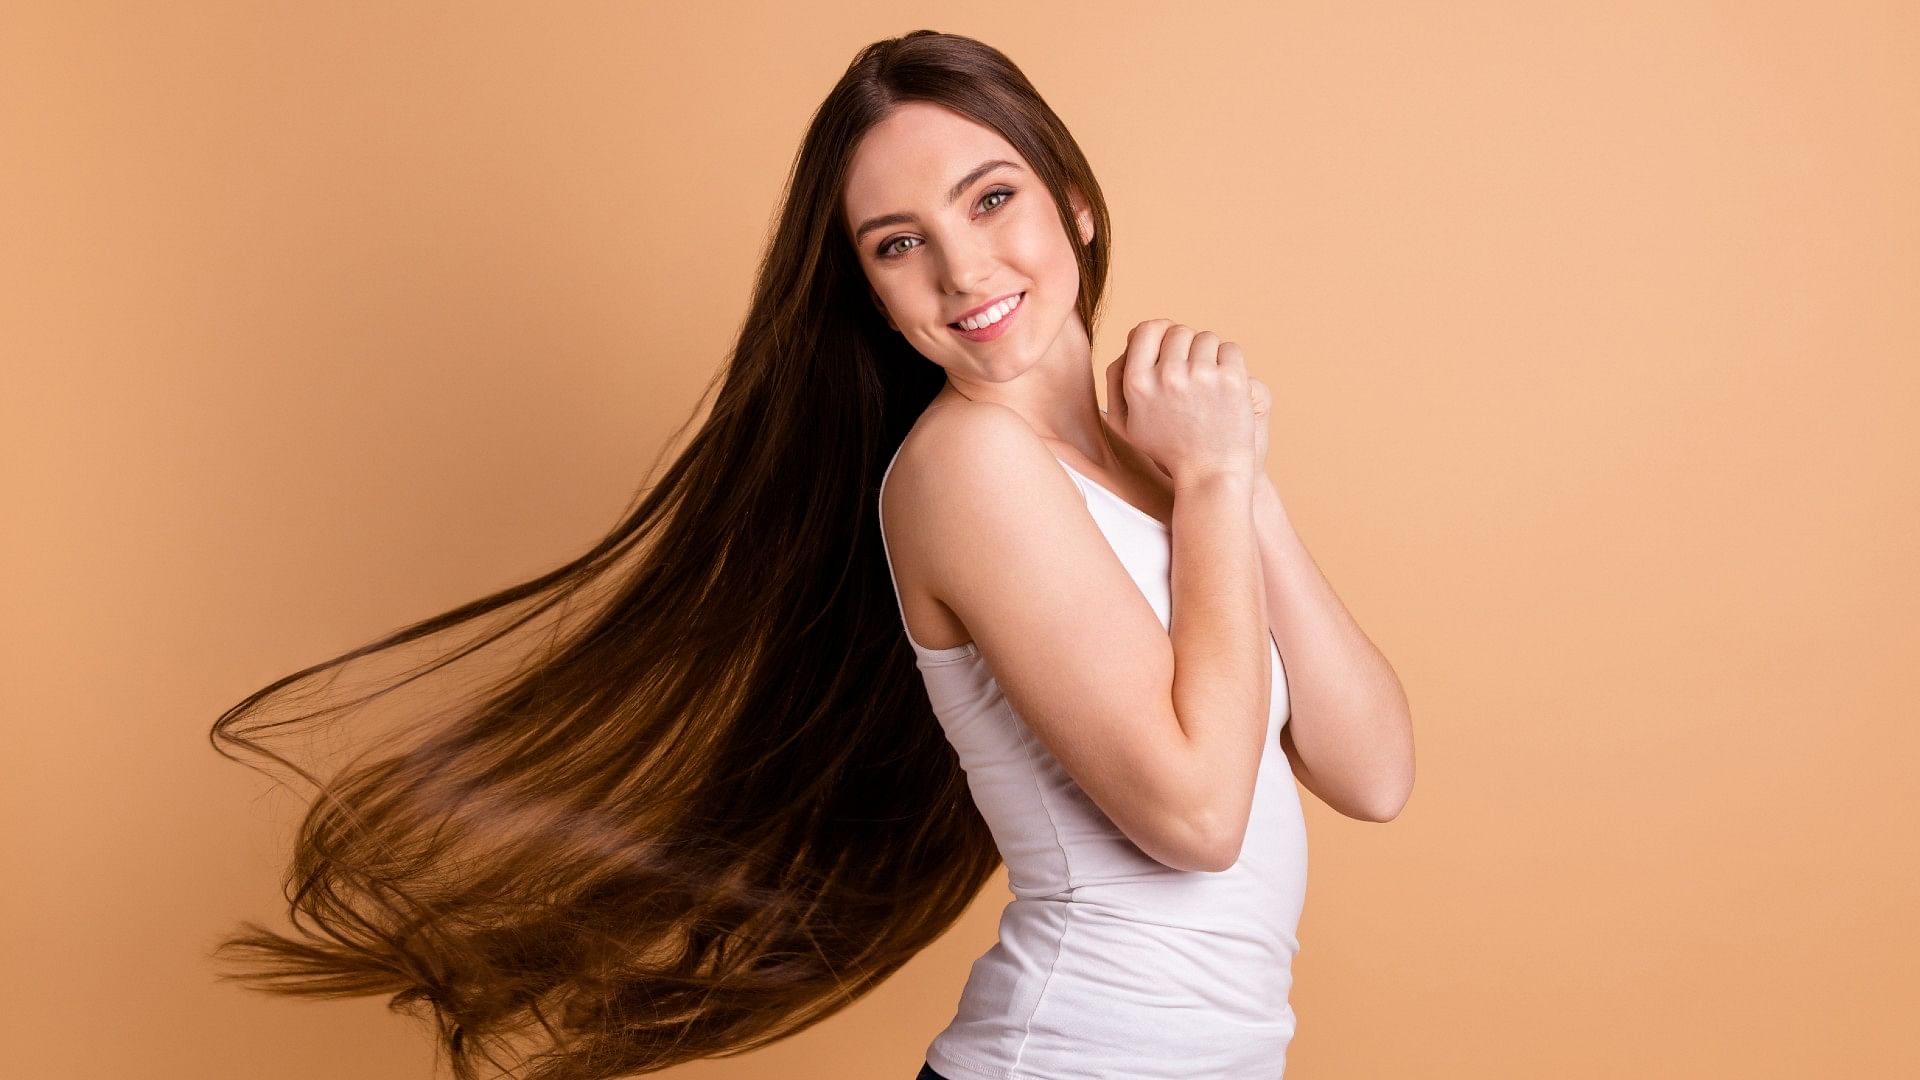 Hair Growth Tips: Include vitamins A C D and E in your diet which increase the length of your hair.